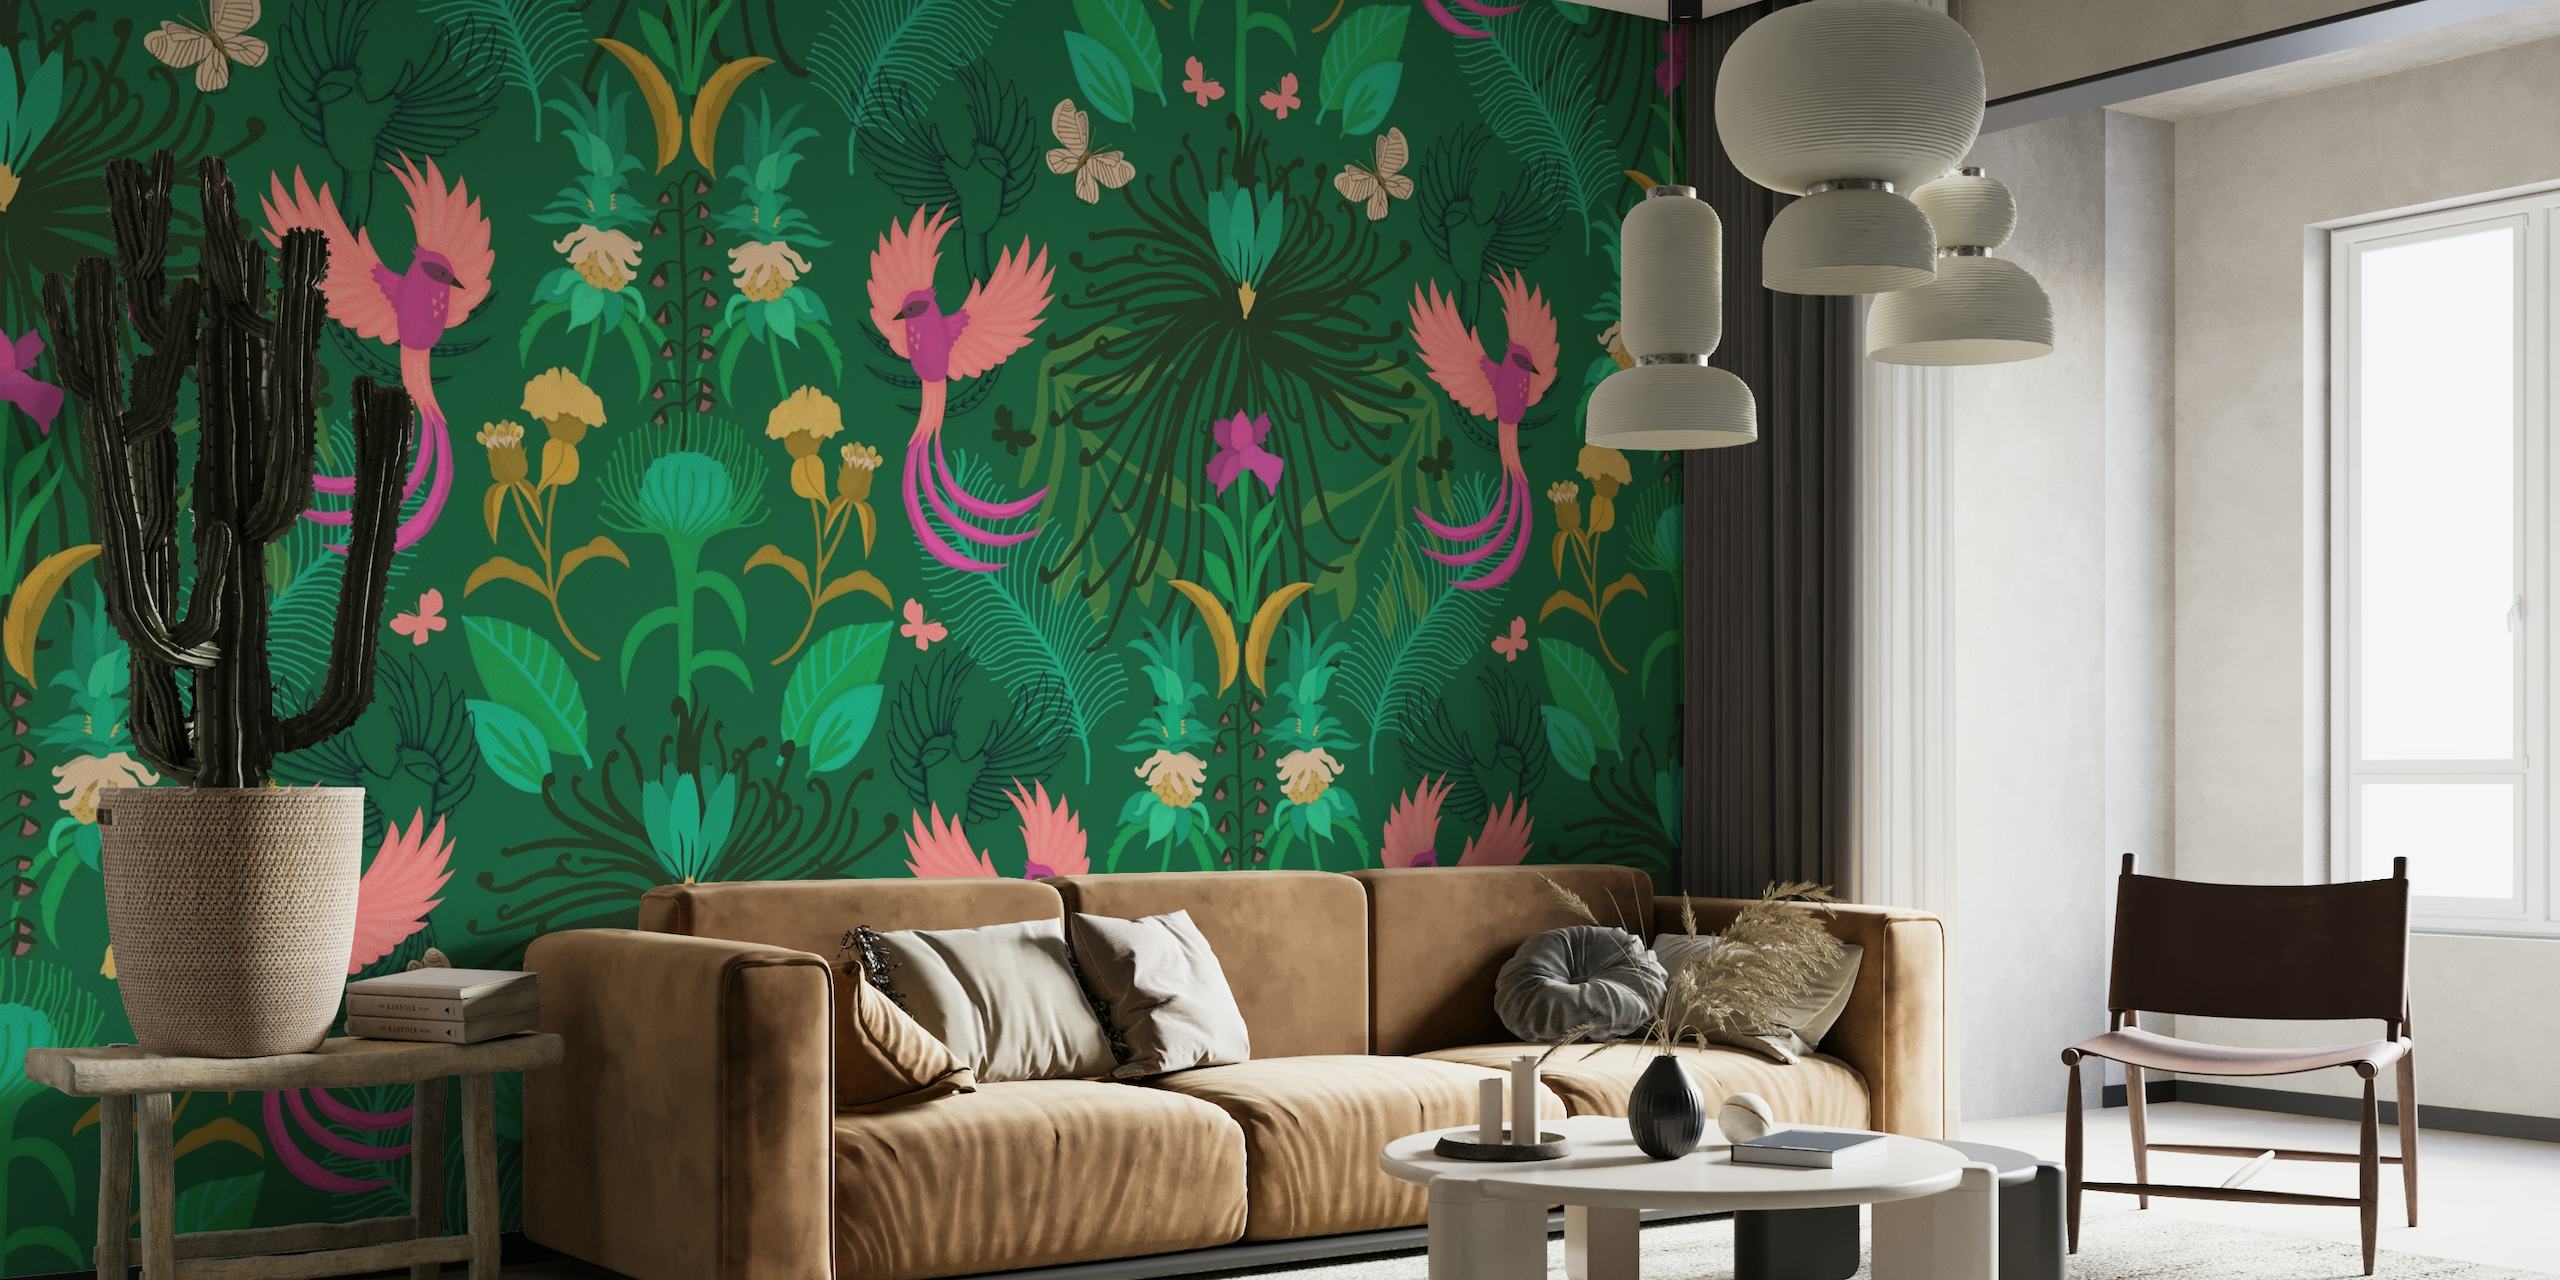 Colorful wall mural of a secret garden with vibrant exotic birds and lush greenery